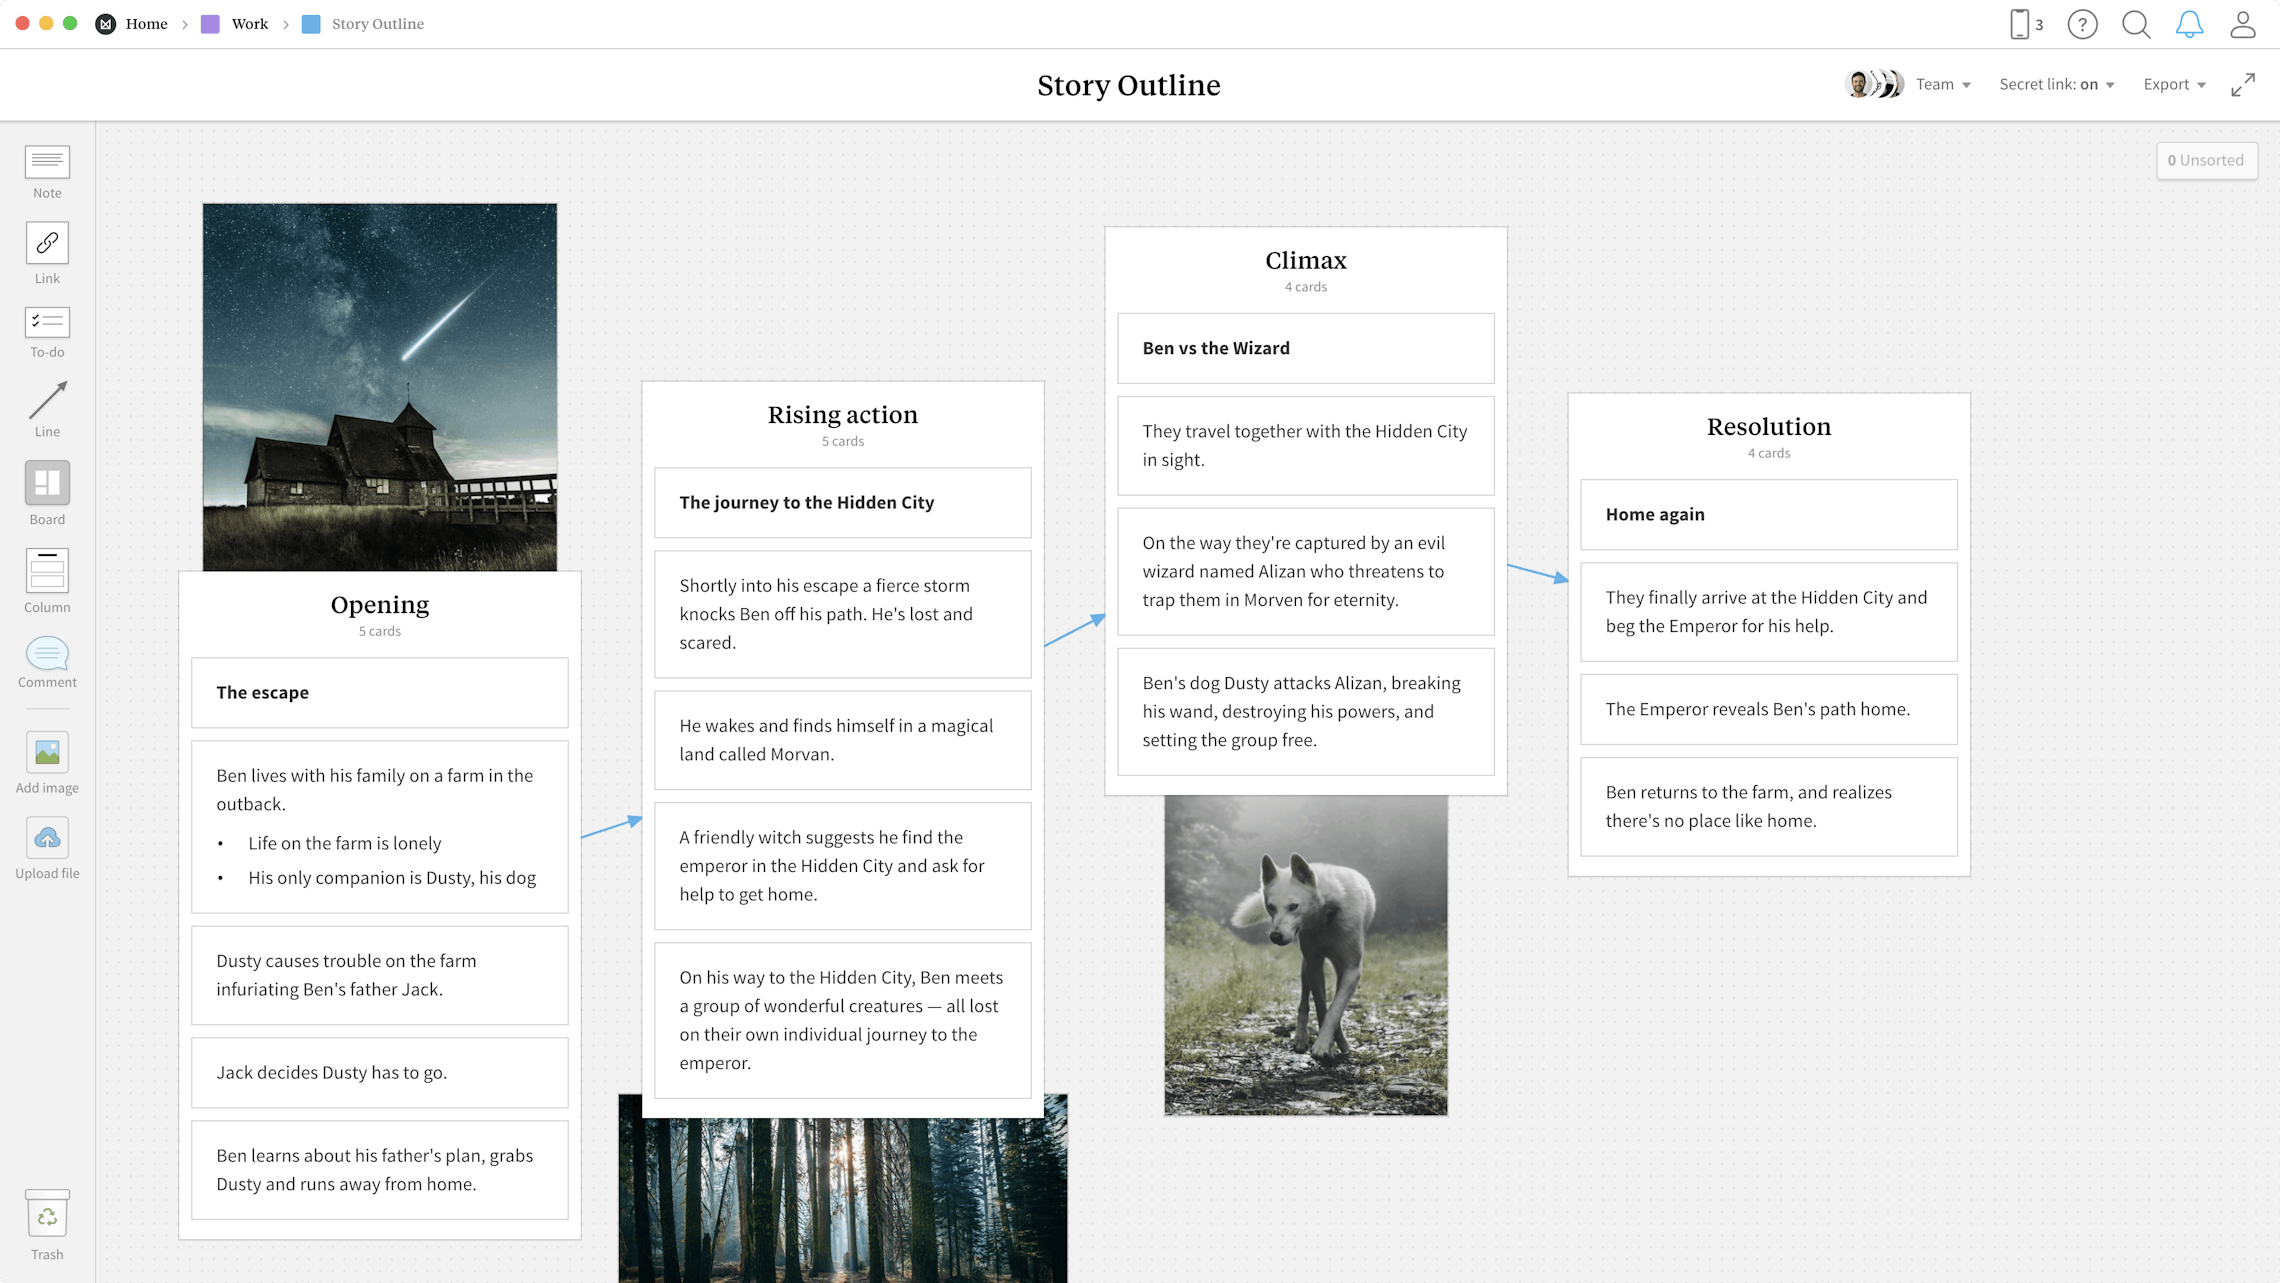 Template For Outline from images.prismic.io